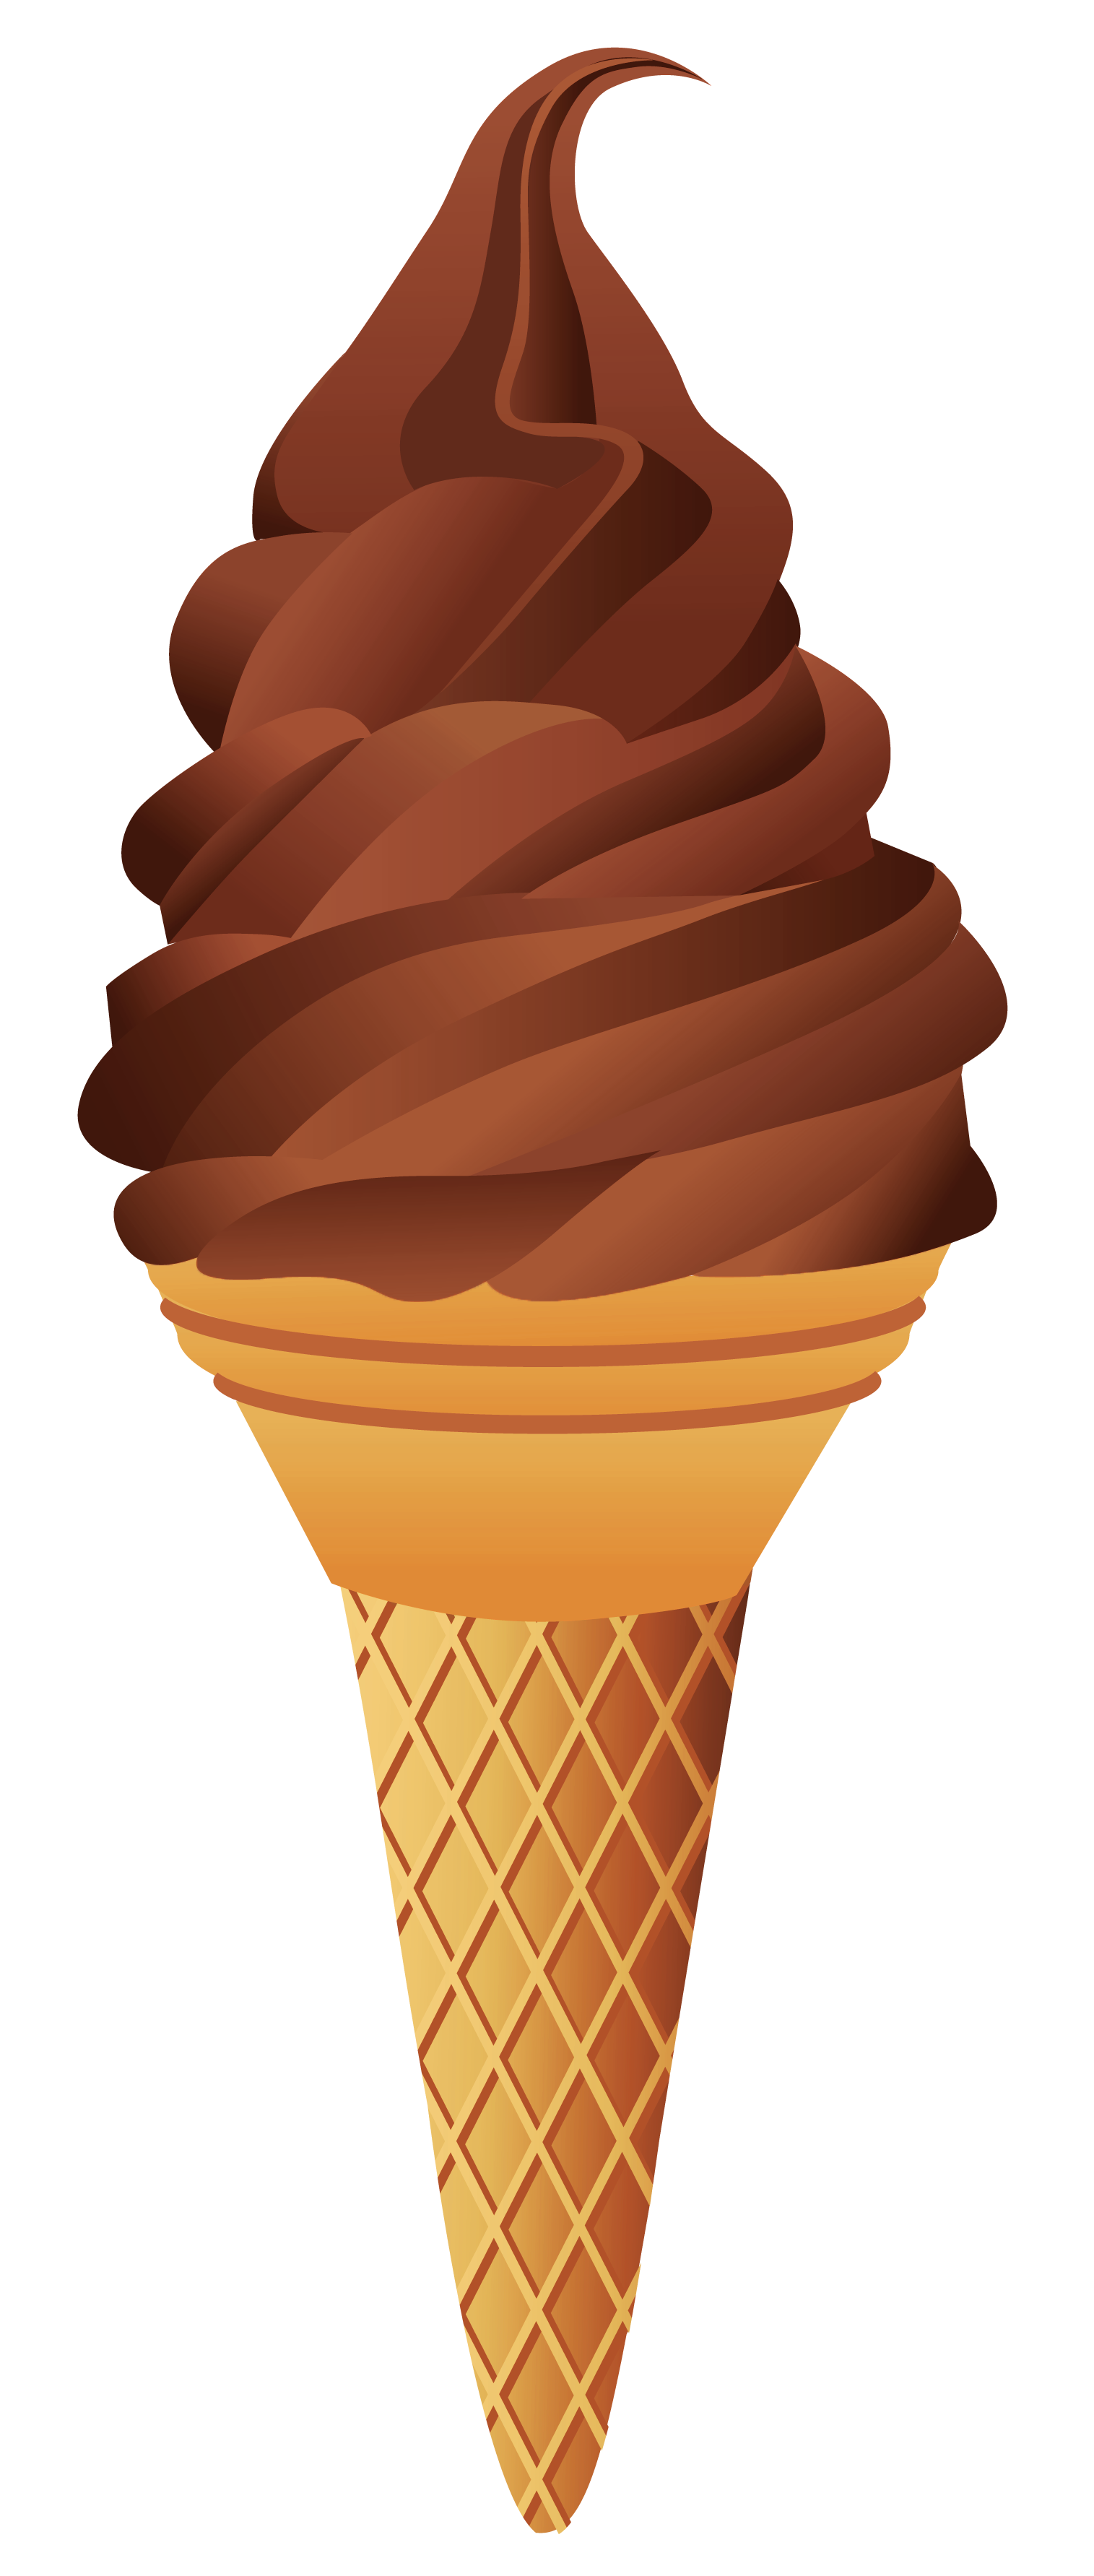 Ice Cream Icon Png Transparent Background Free Download 9377 | Images ...